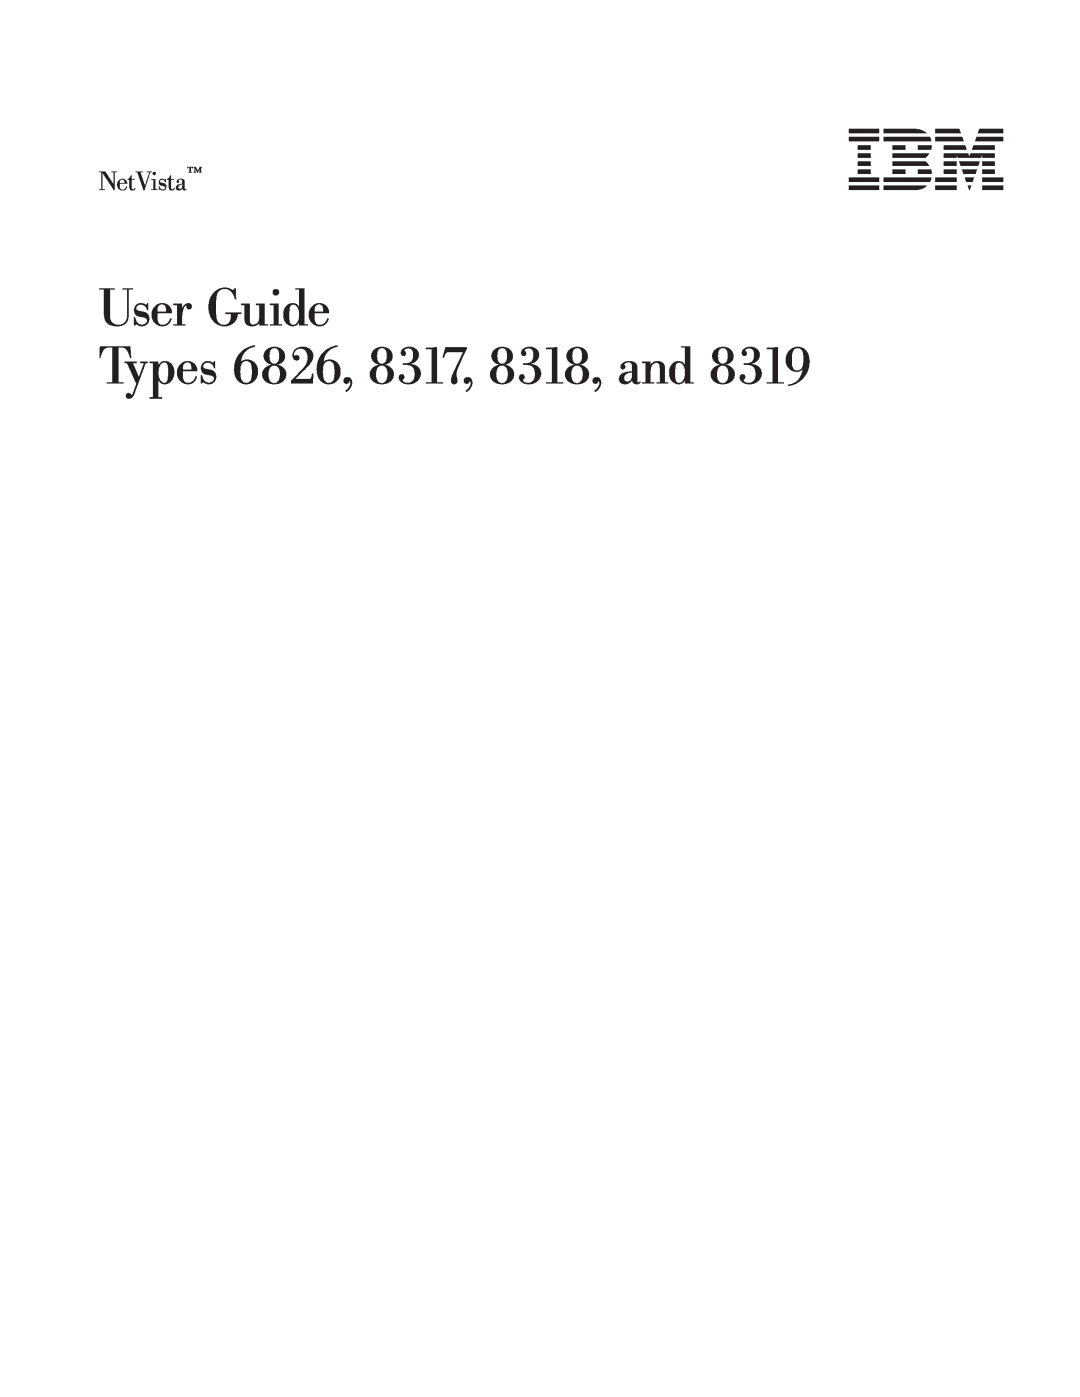 IBM 8319 manual User Guide Types 6826, 8317, 8318, and, NetVista 